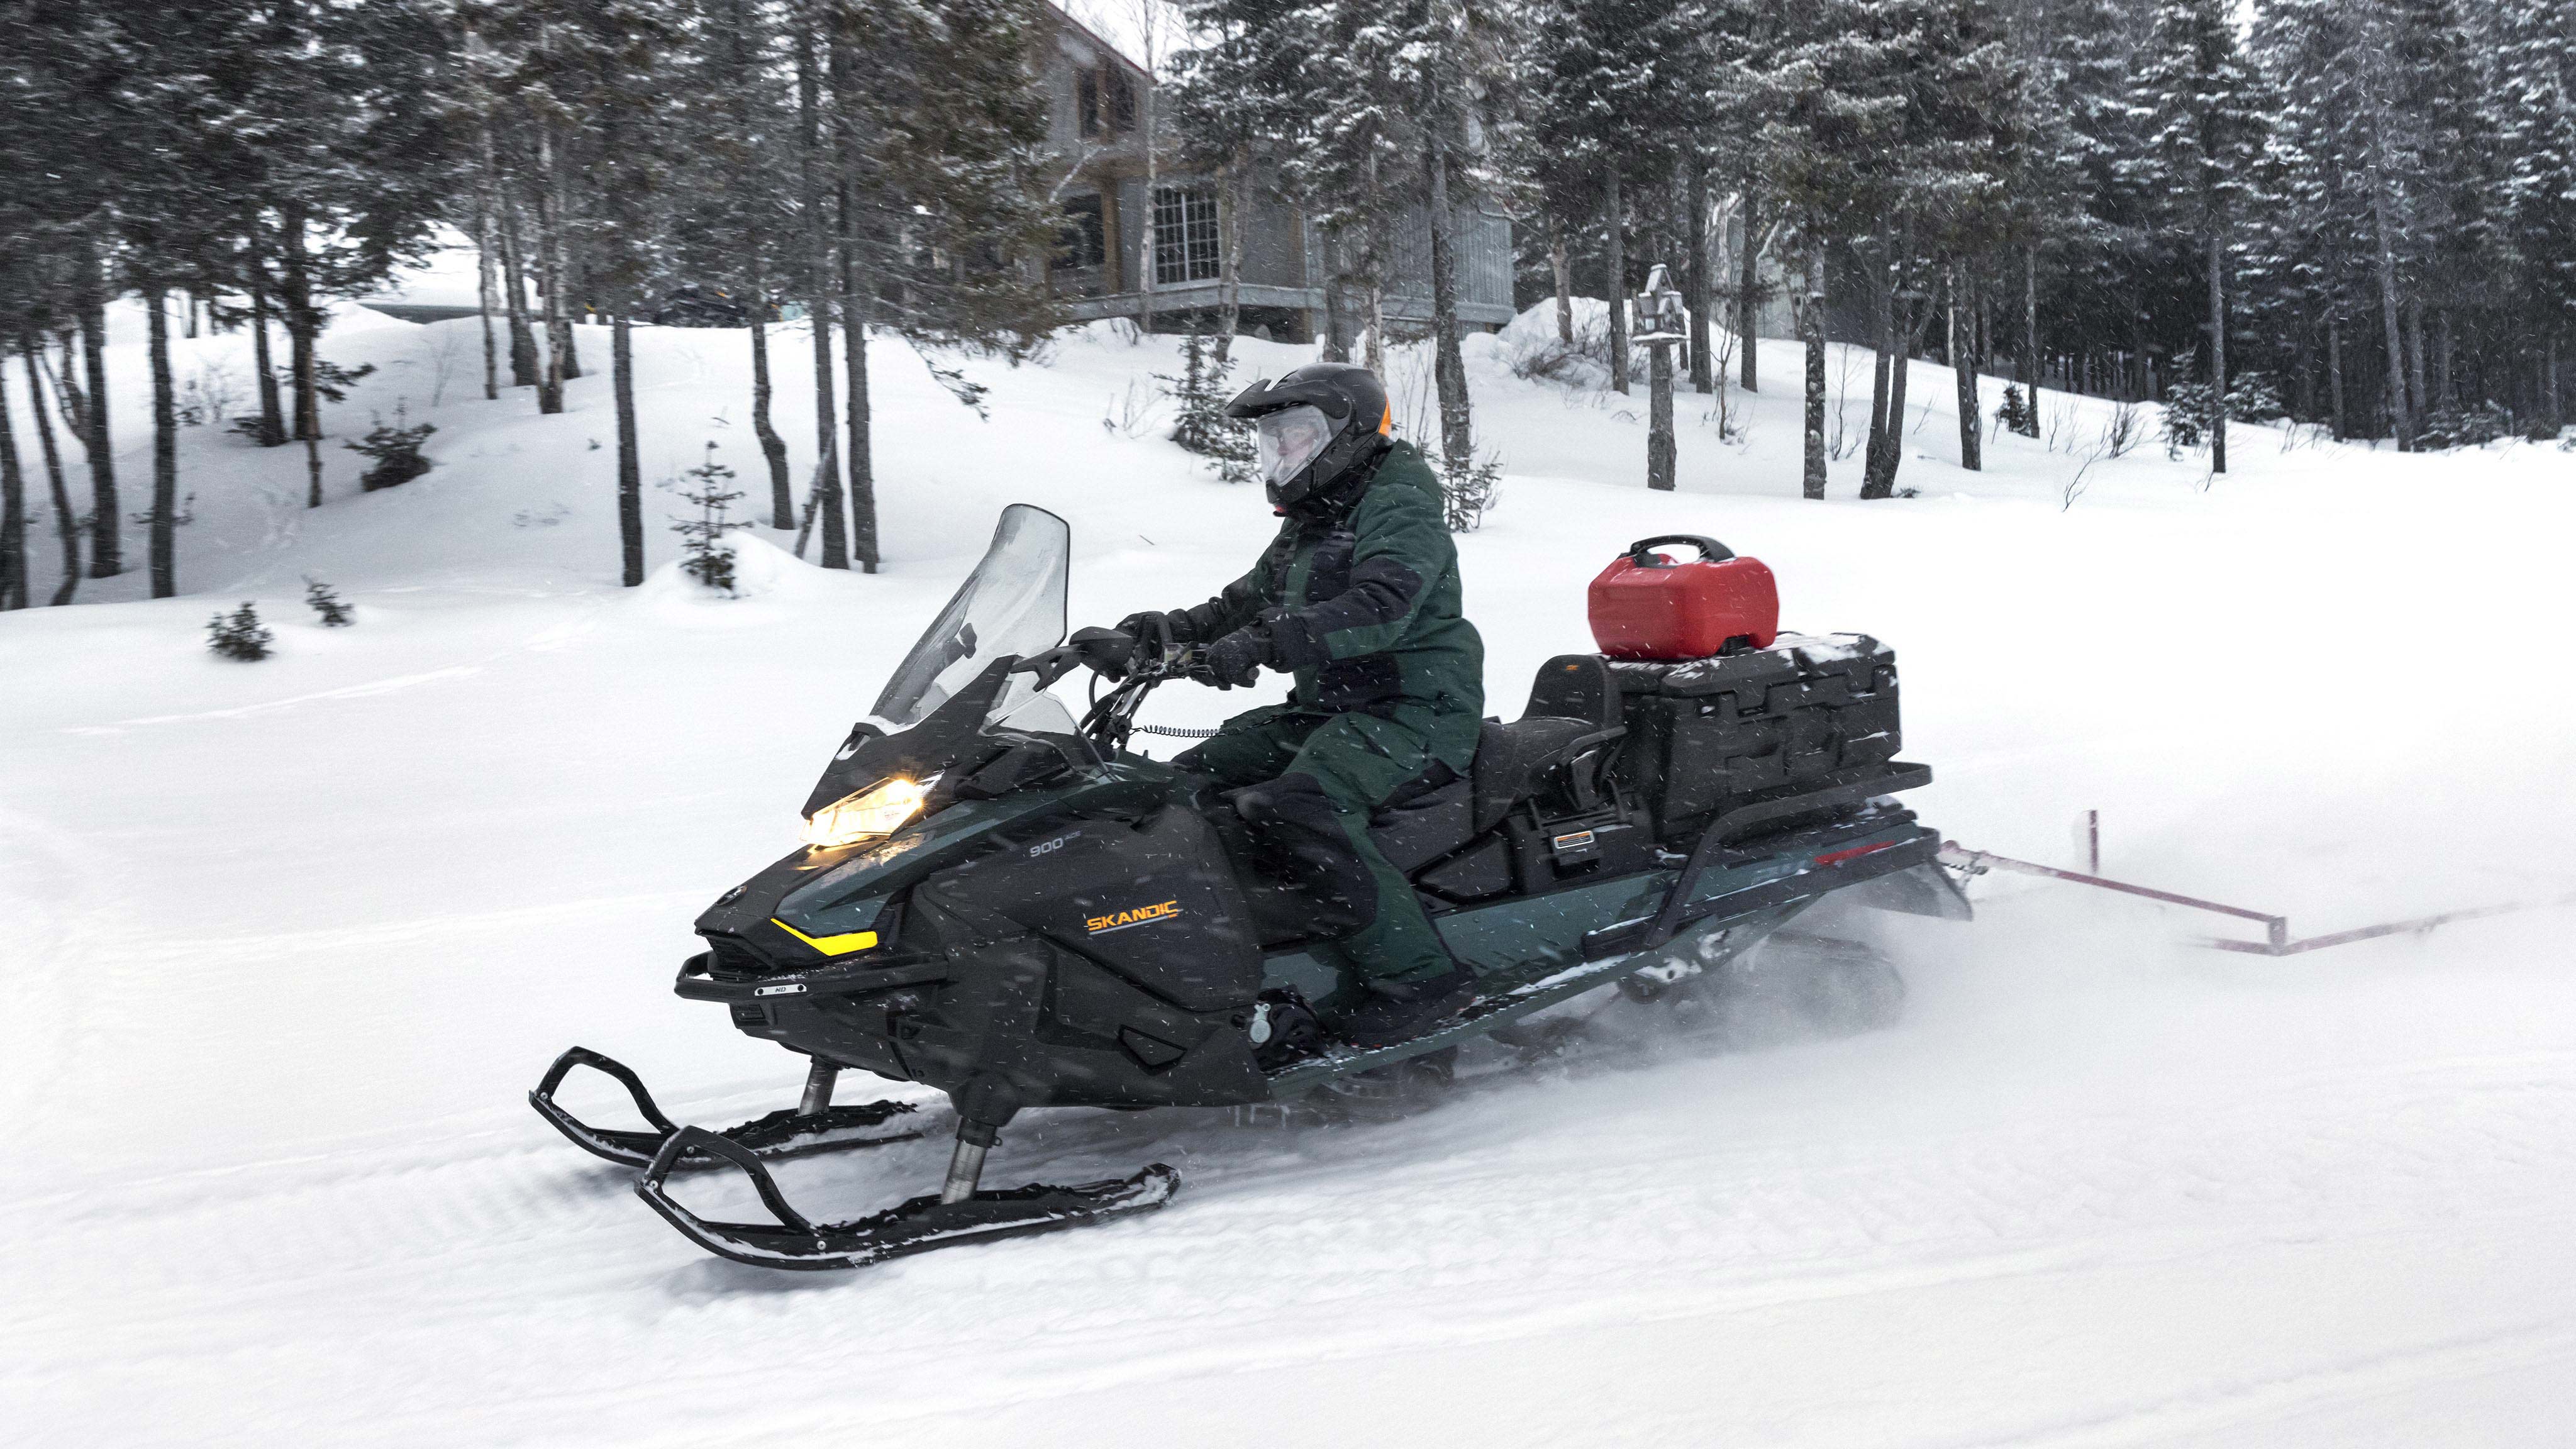 Rider towing with his Ski-Doo Skandic equipped with LinQ accessories